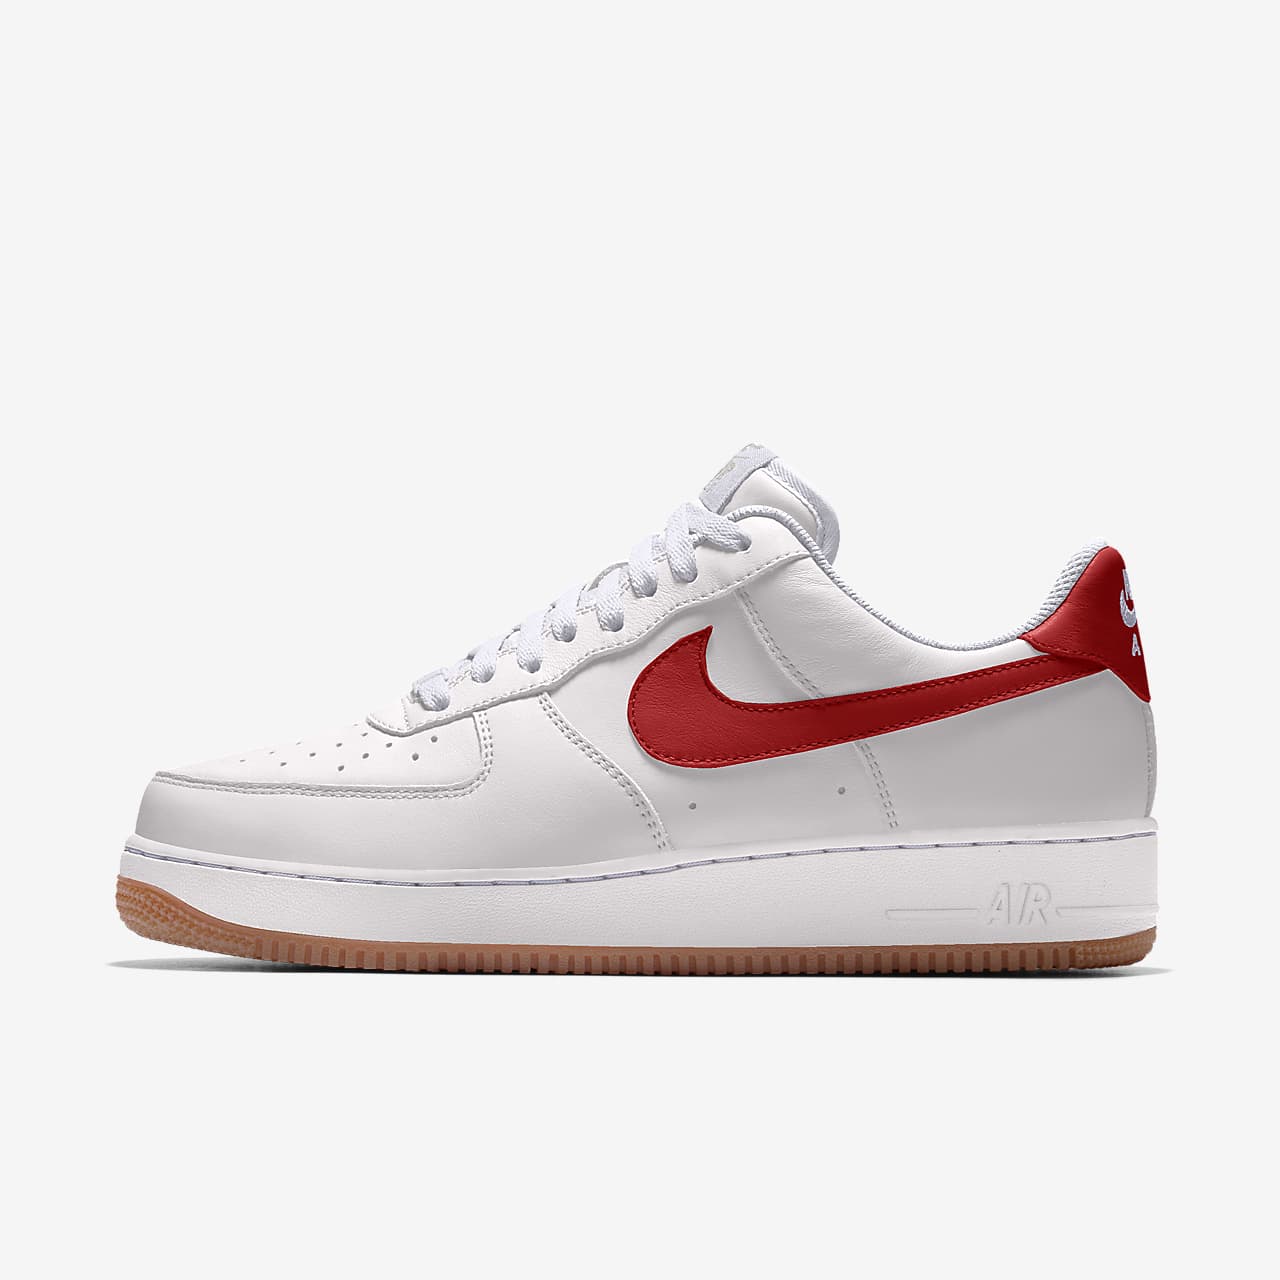 Sapatilhas personalizáveis Nike Air Force 1 Low By You para mulher